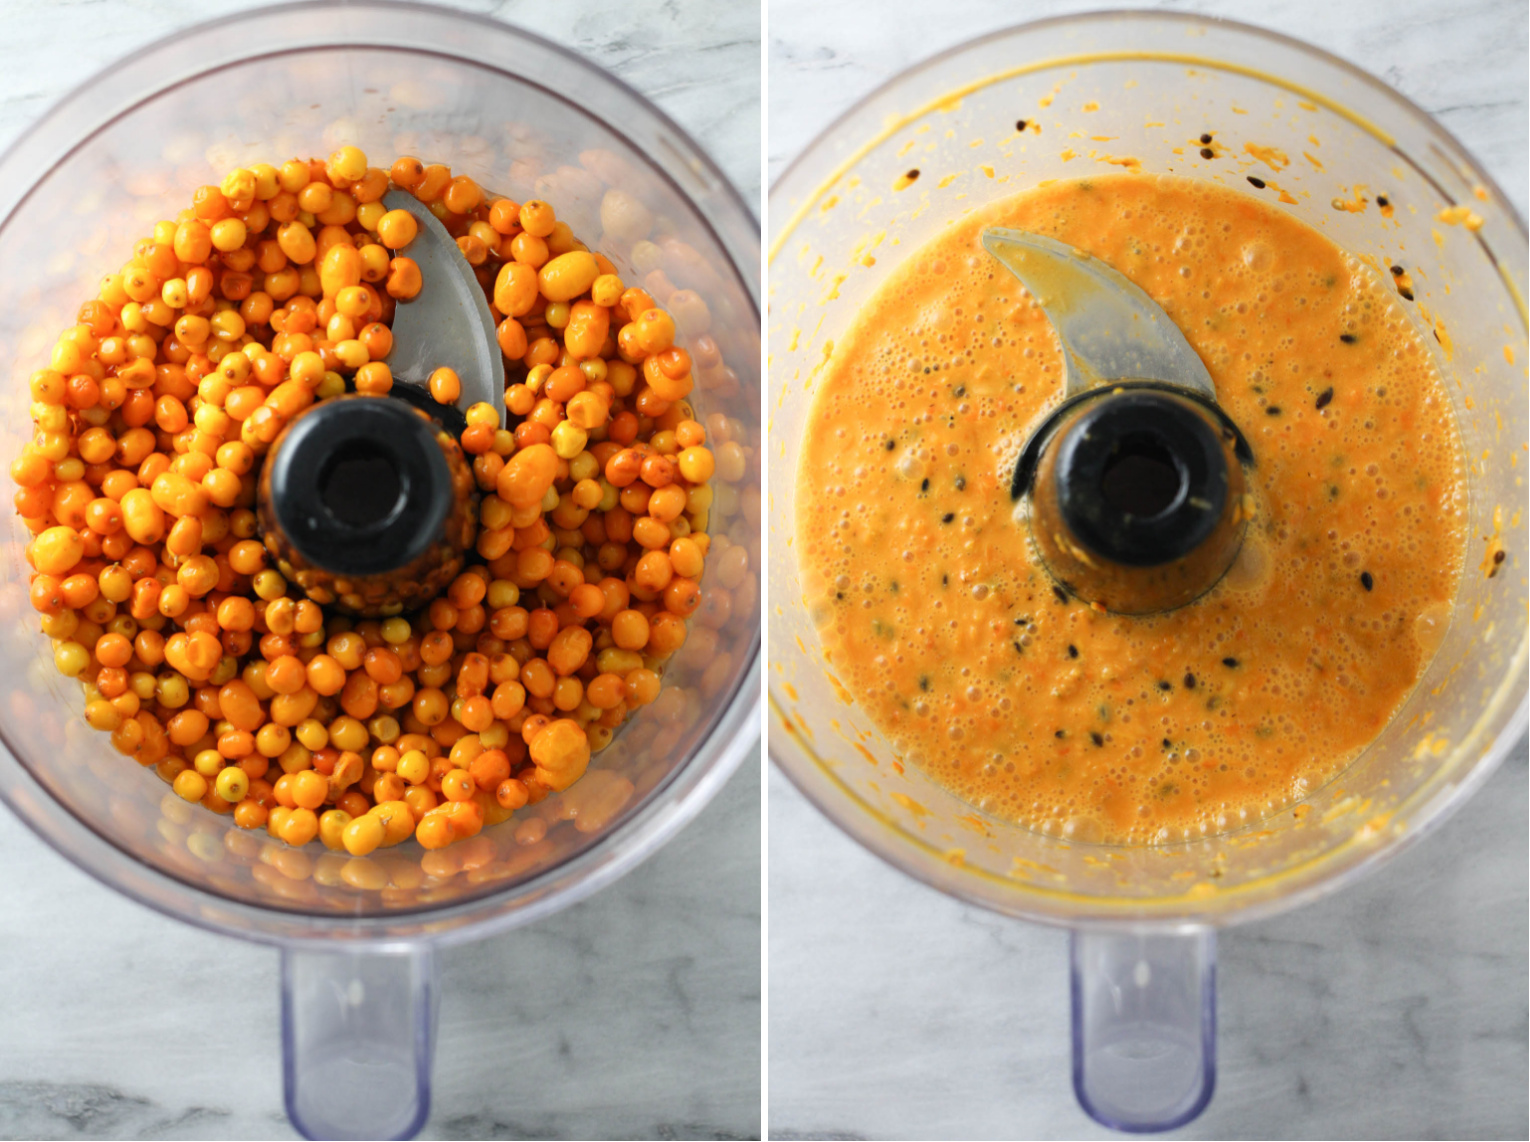 Two side-by-side images. On the left image, sea buckthorn berries in a bowl of food processor. On the right image, pureed sea buckthorn berries in a bowl of food processor.